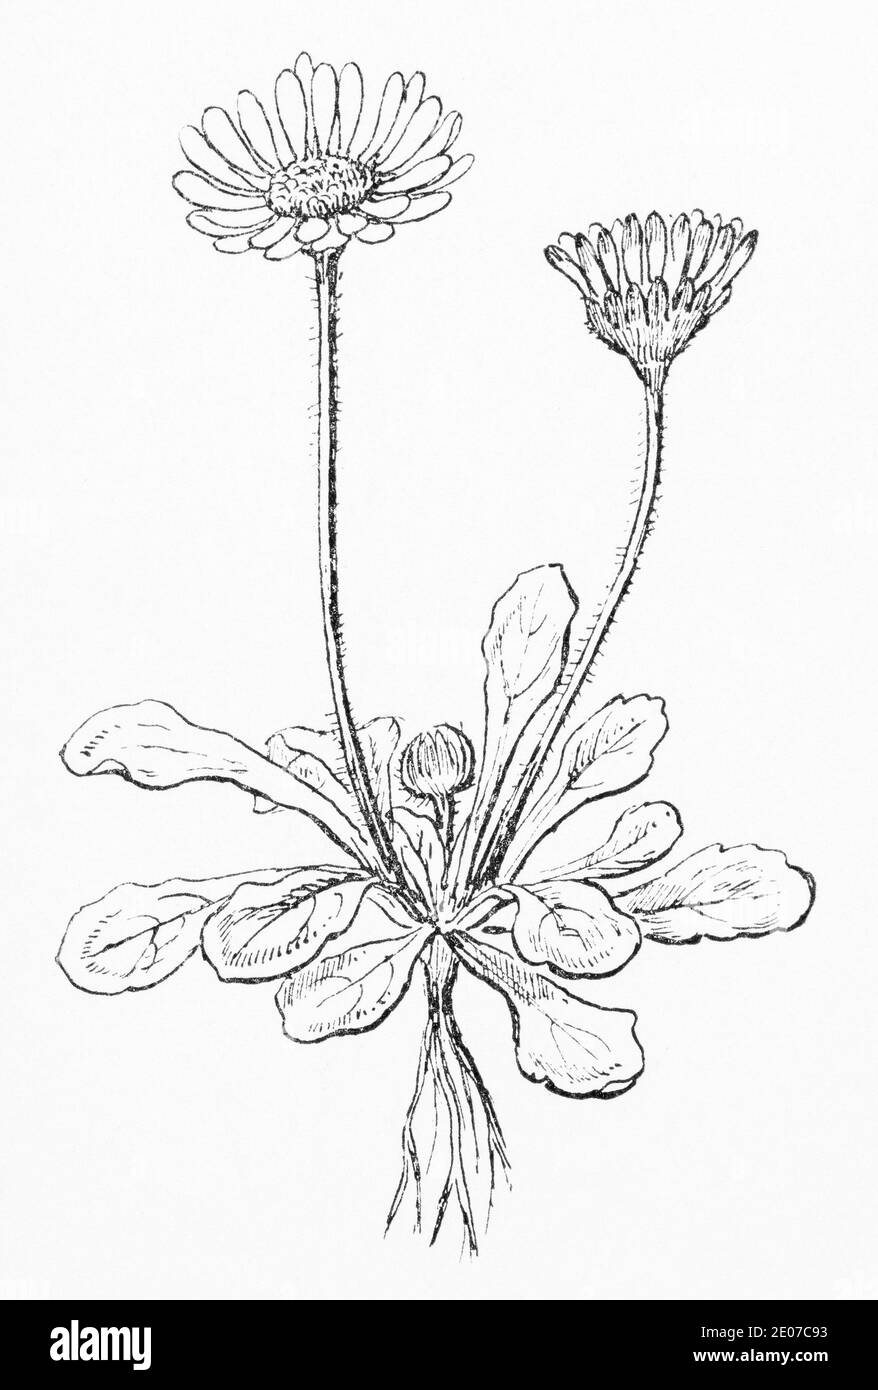 Old botanical illustration engraving of Daisy / Bellis perennis. Traditional medicinal herbal plant. See Notes Stock Photo